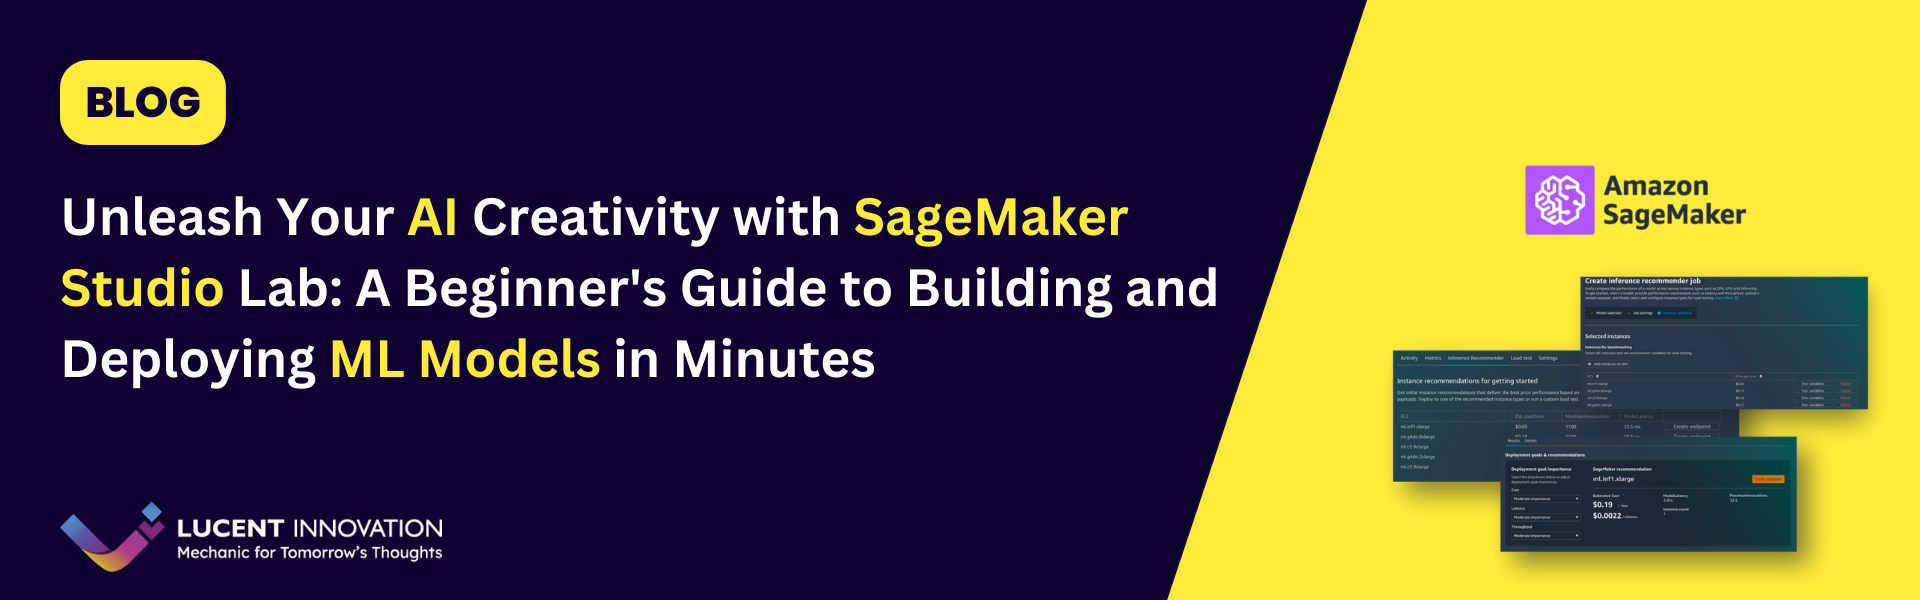 Unleash Your AI Creativity with SageMaker Studio Lab: A Beginner's Guide to Building and Deploying ML Models in Minutes